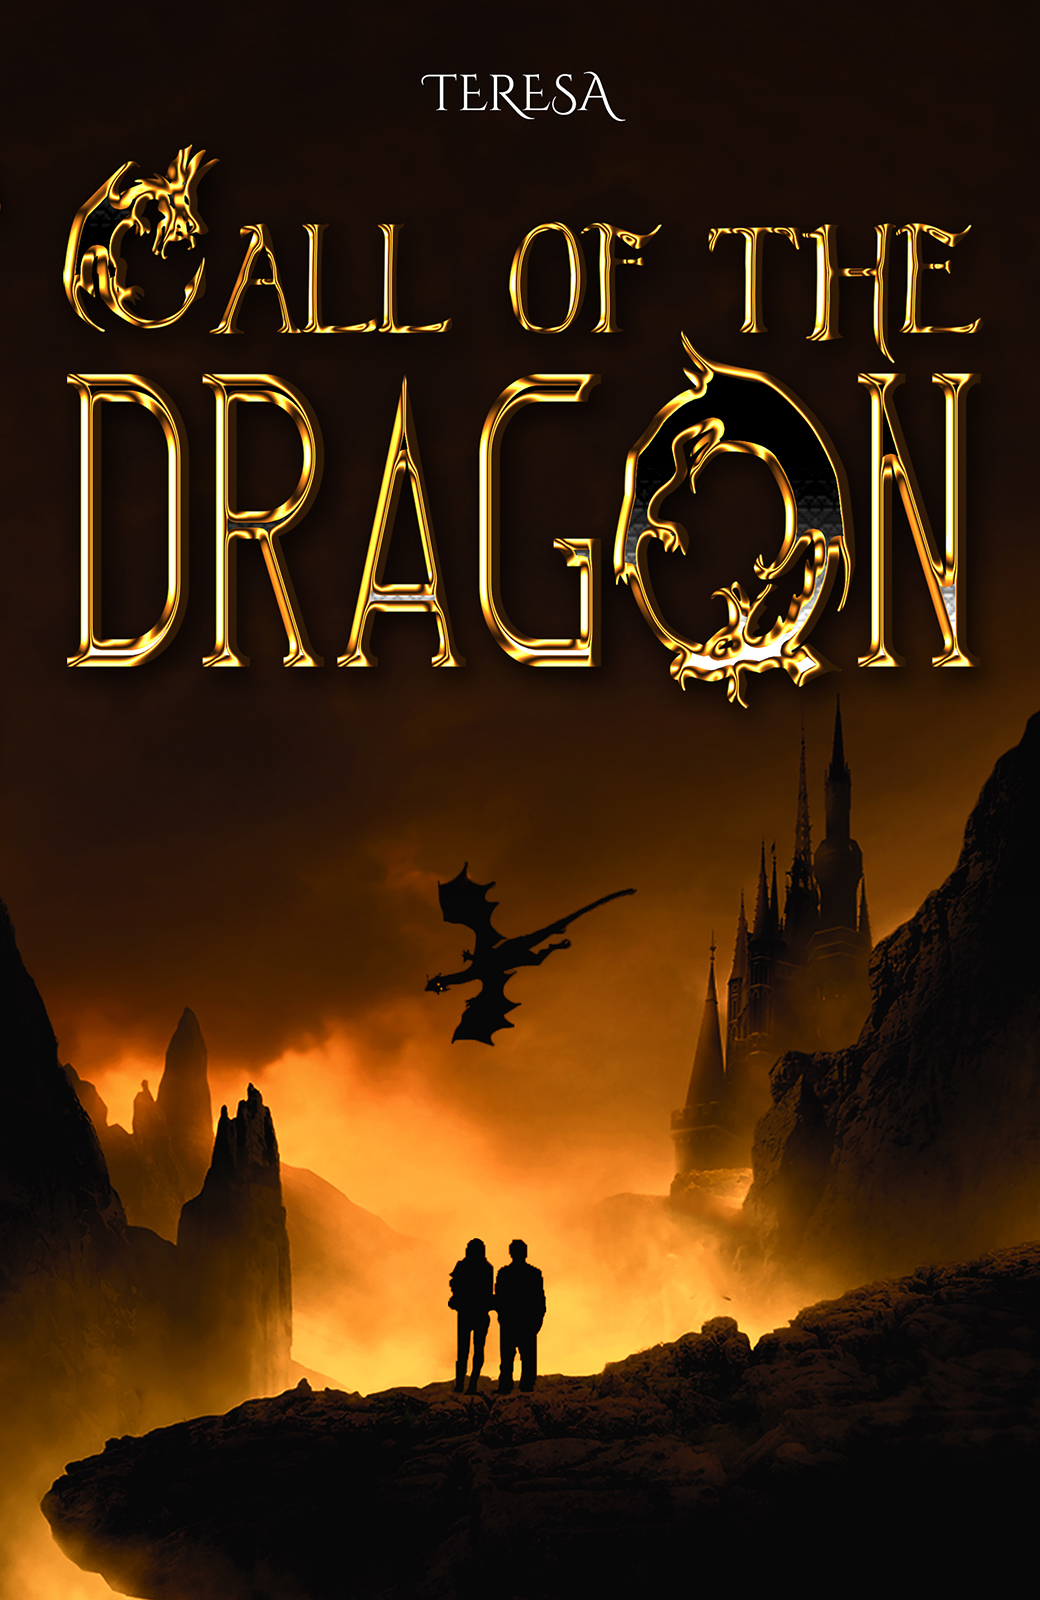 This image is the cover for the book Call of the Dragon